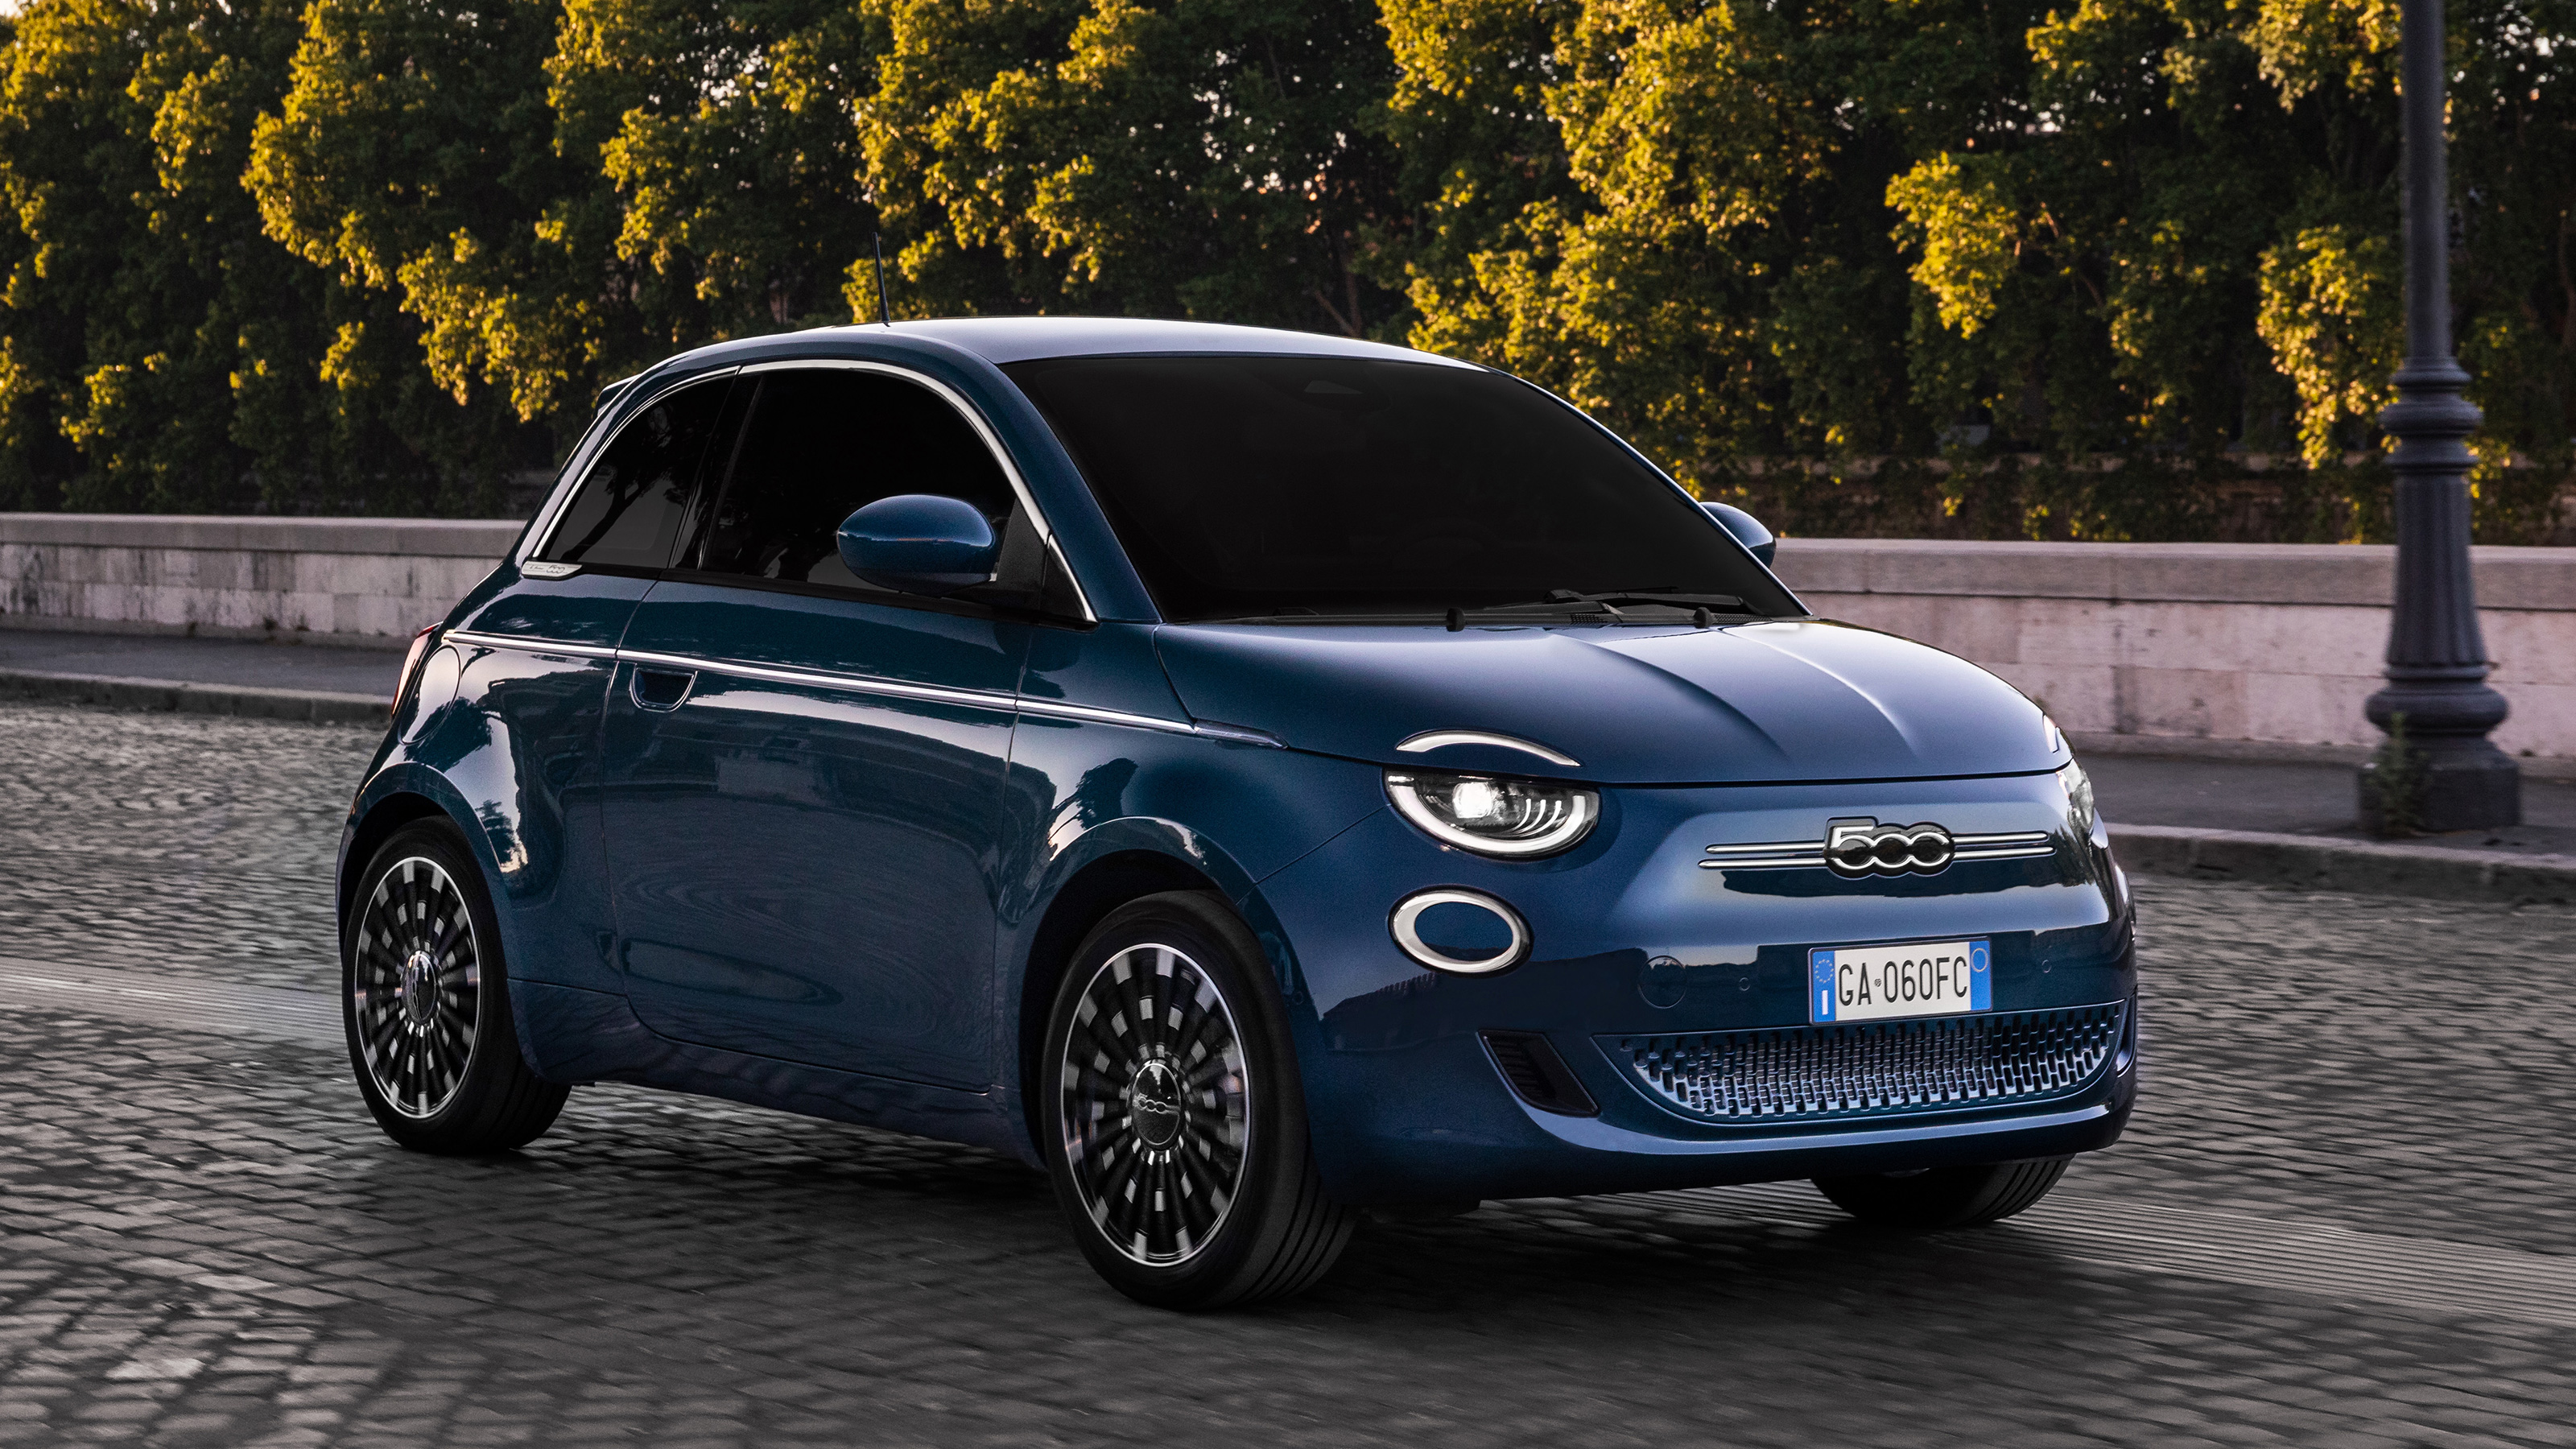 New 2020 Fiat 500 Hard Top Hatchback Version Of New Electric City